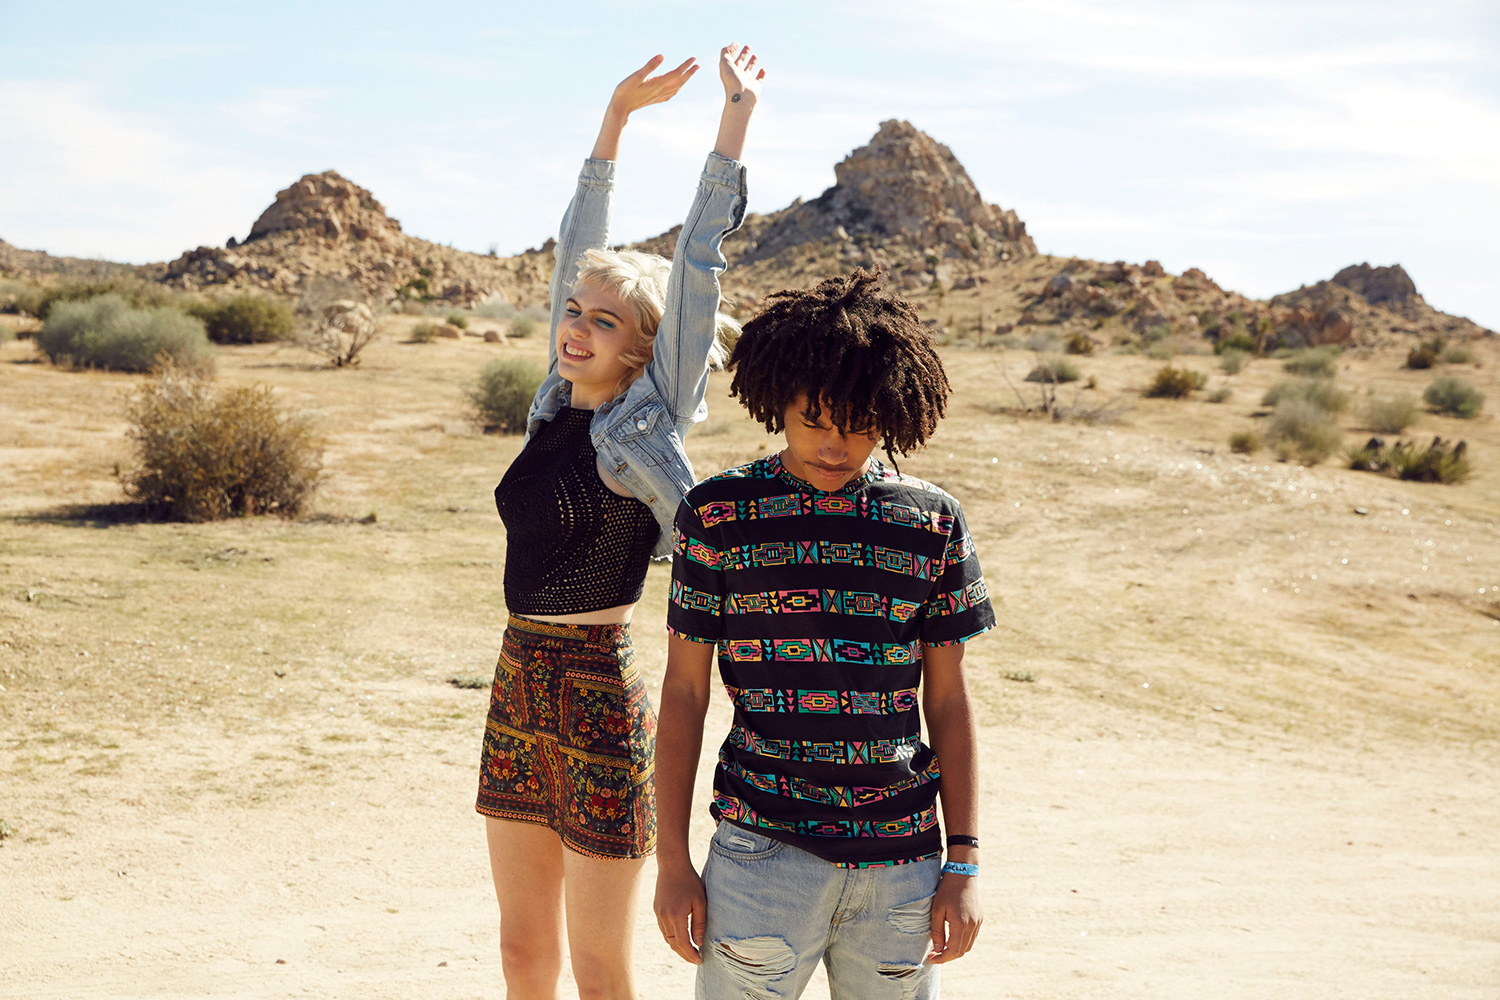 H&M Set To Drop Another Co-Branded Collection for Coachella